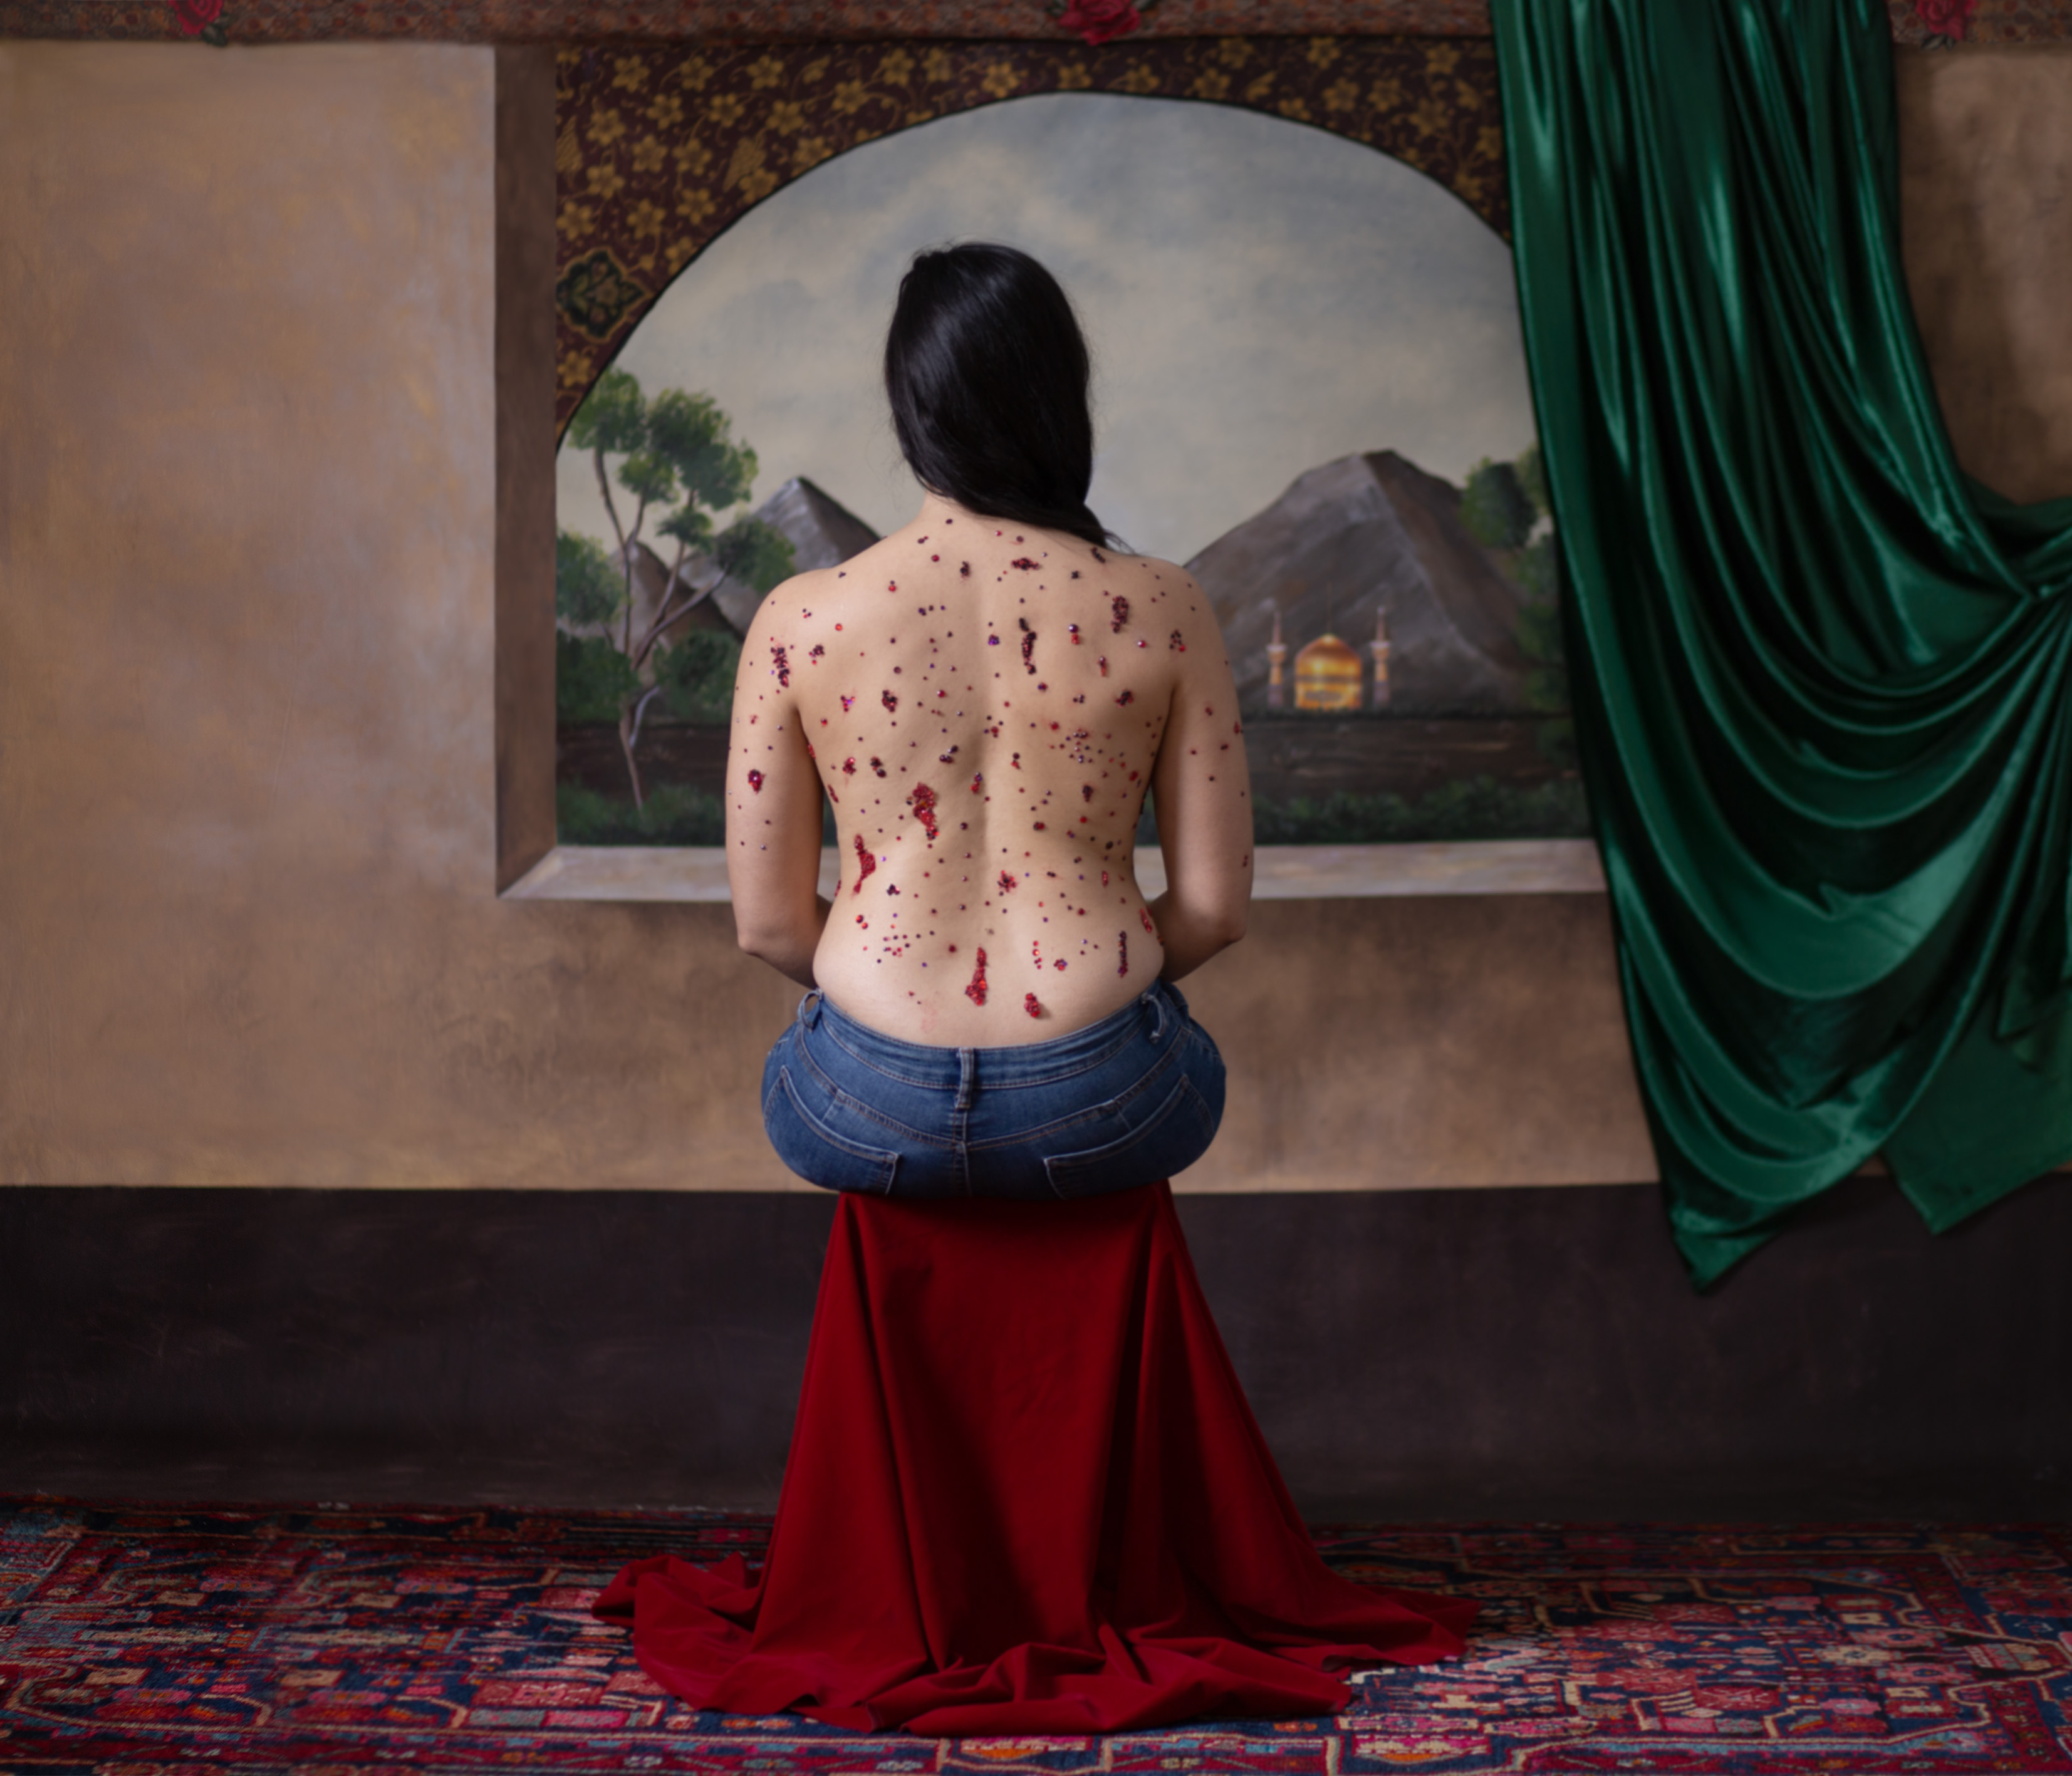 image of a painted background inside a house. There is a woman sitting on on a red stool looking out the window. Her back is faced towards us and is covered in red jewels depicting blood.